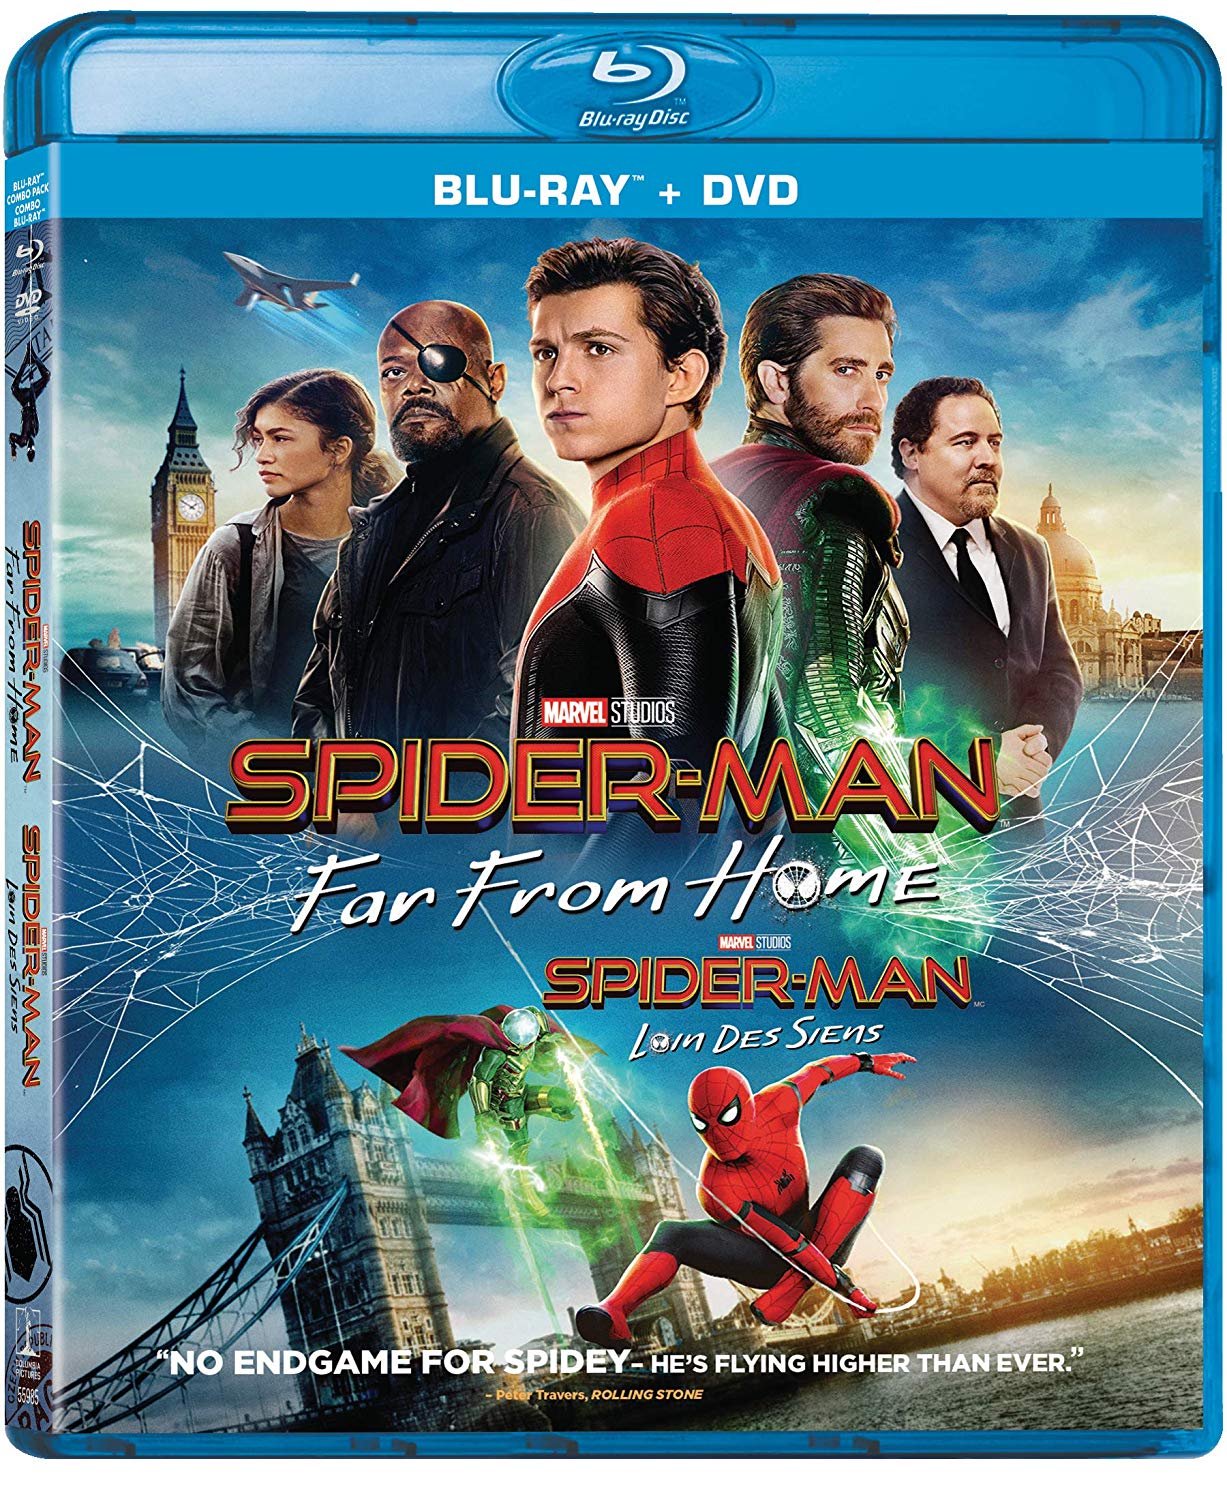  Spider-Man: Far From Home Blu-ray DVD